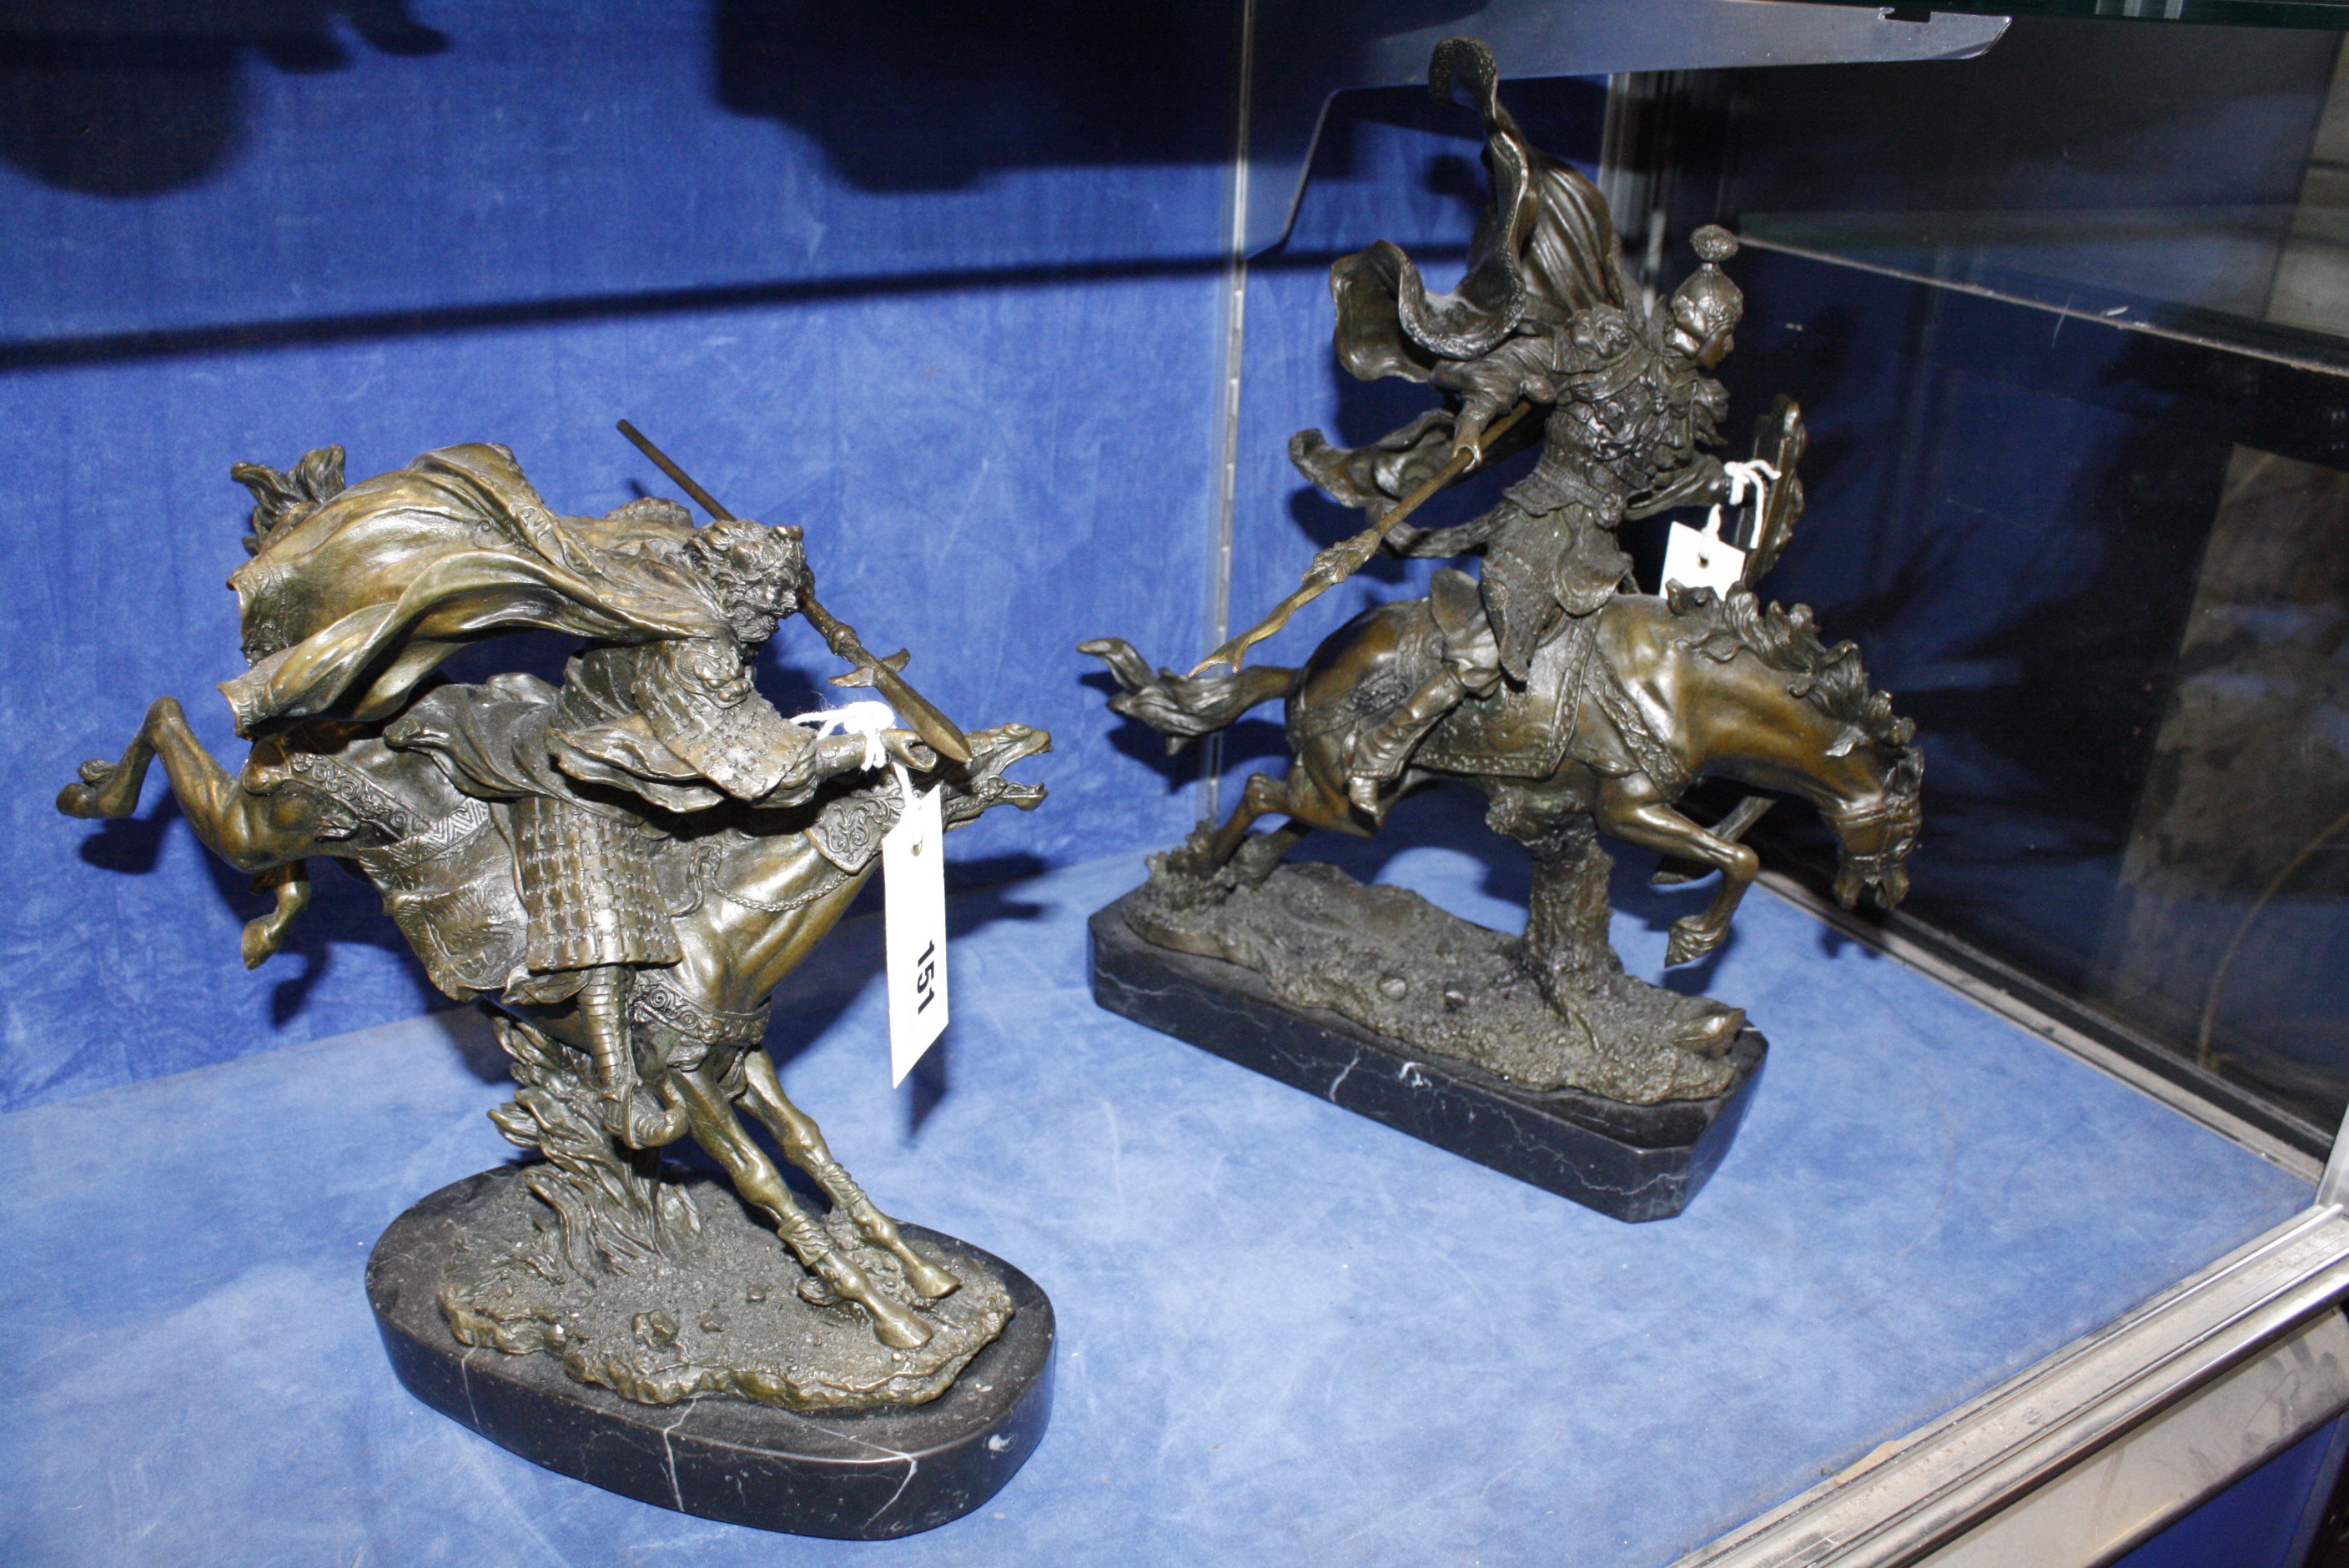 A pair of modern bronze figures of warriors on horseback, 27cm and 37cm high approx. (2)